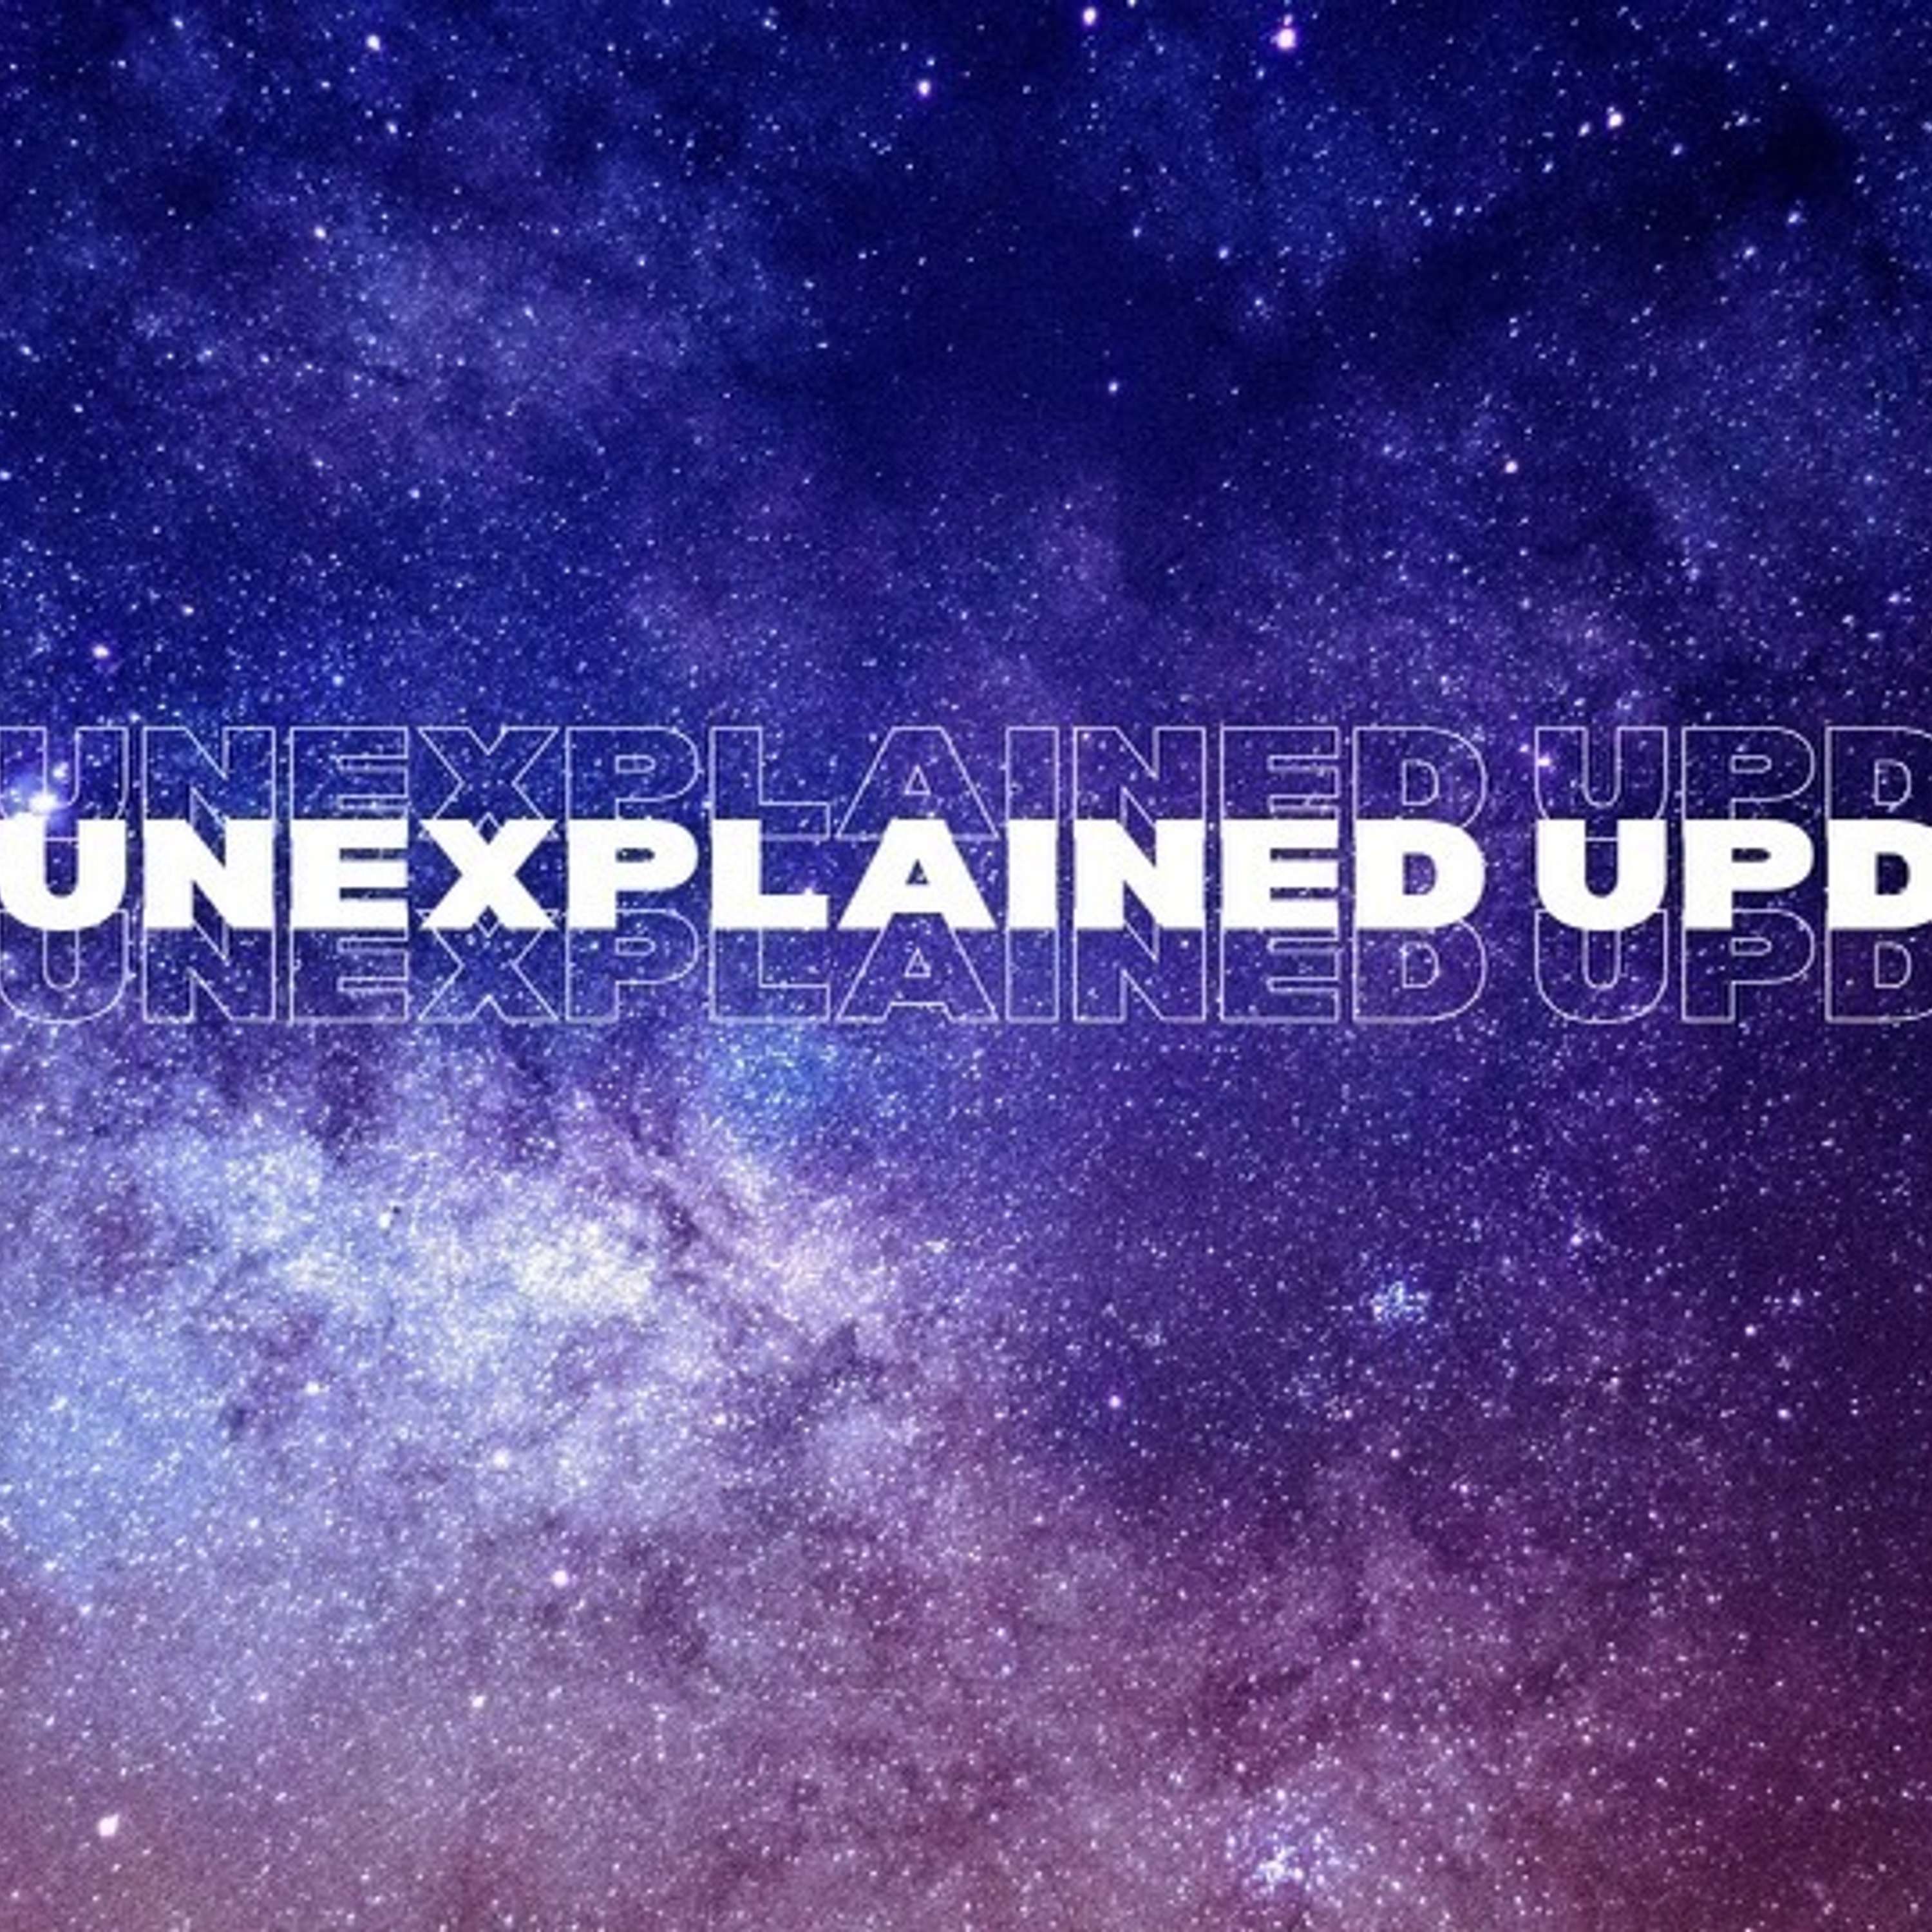 BREAKING Unexplained Update! New UFO revelations from Jeremy Corbell, w/special guest Mr. J